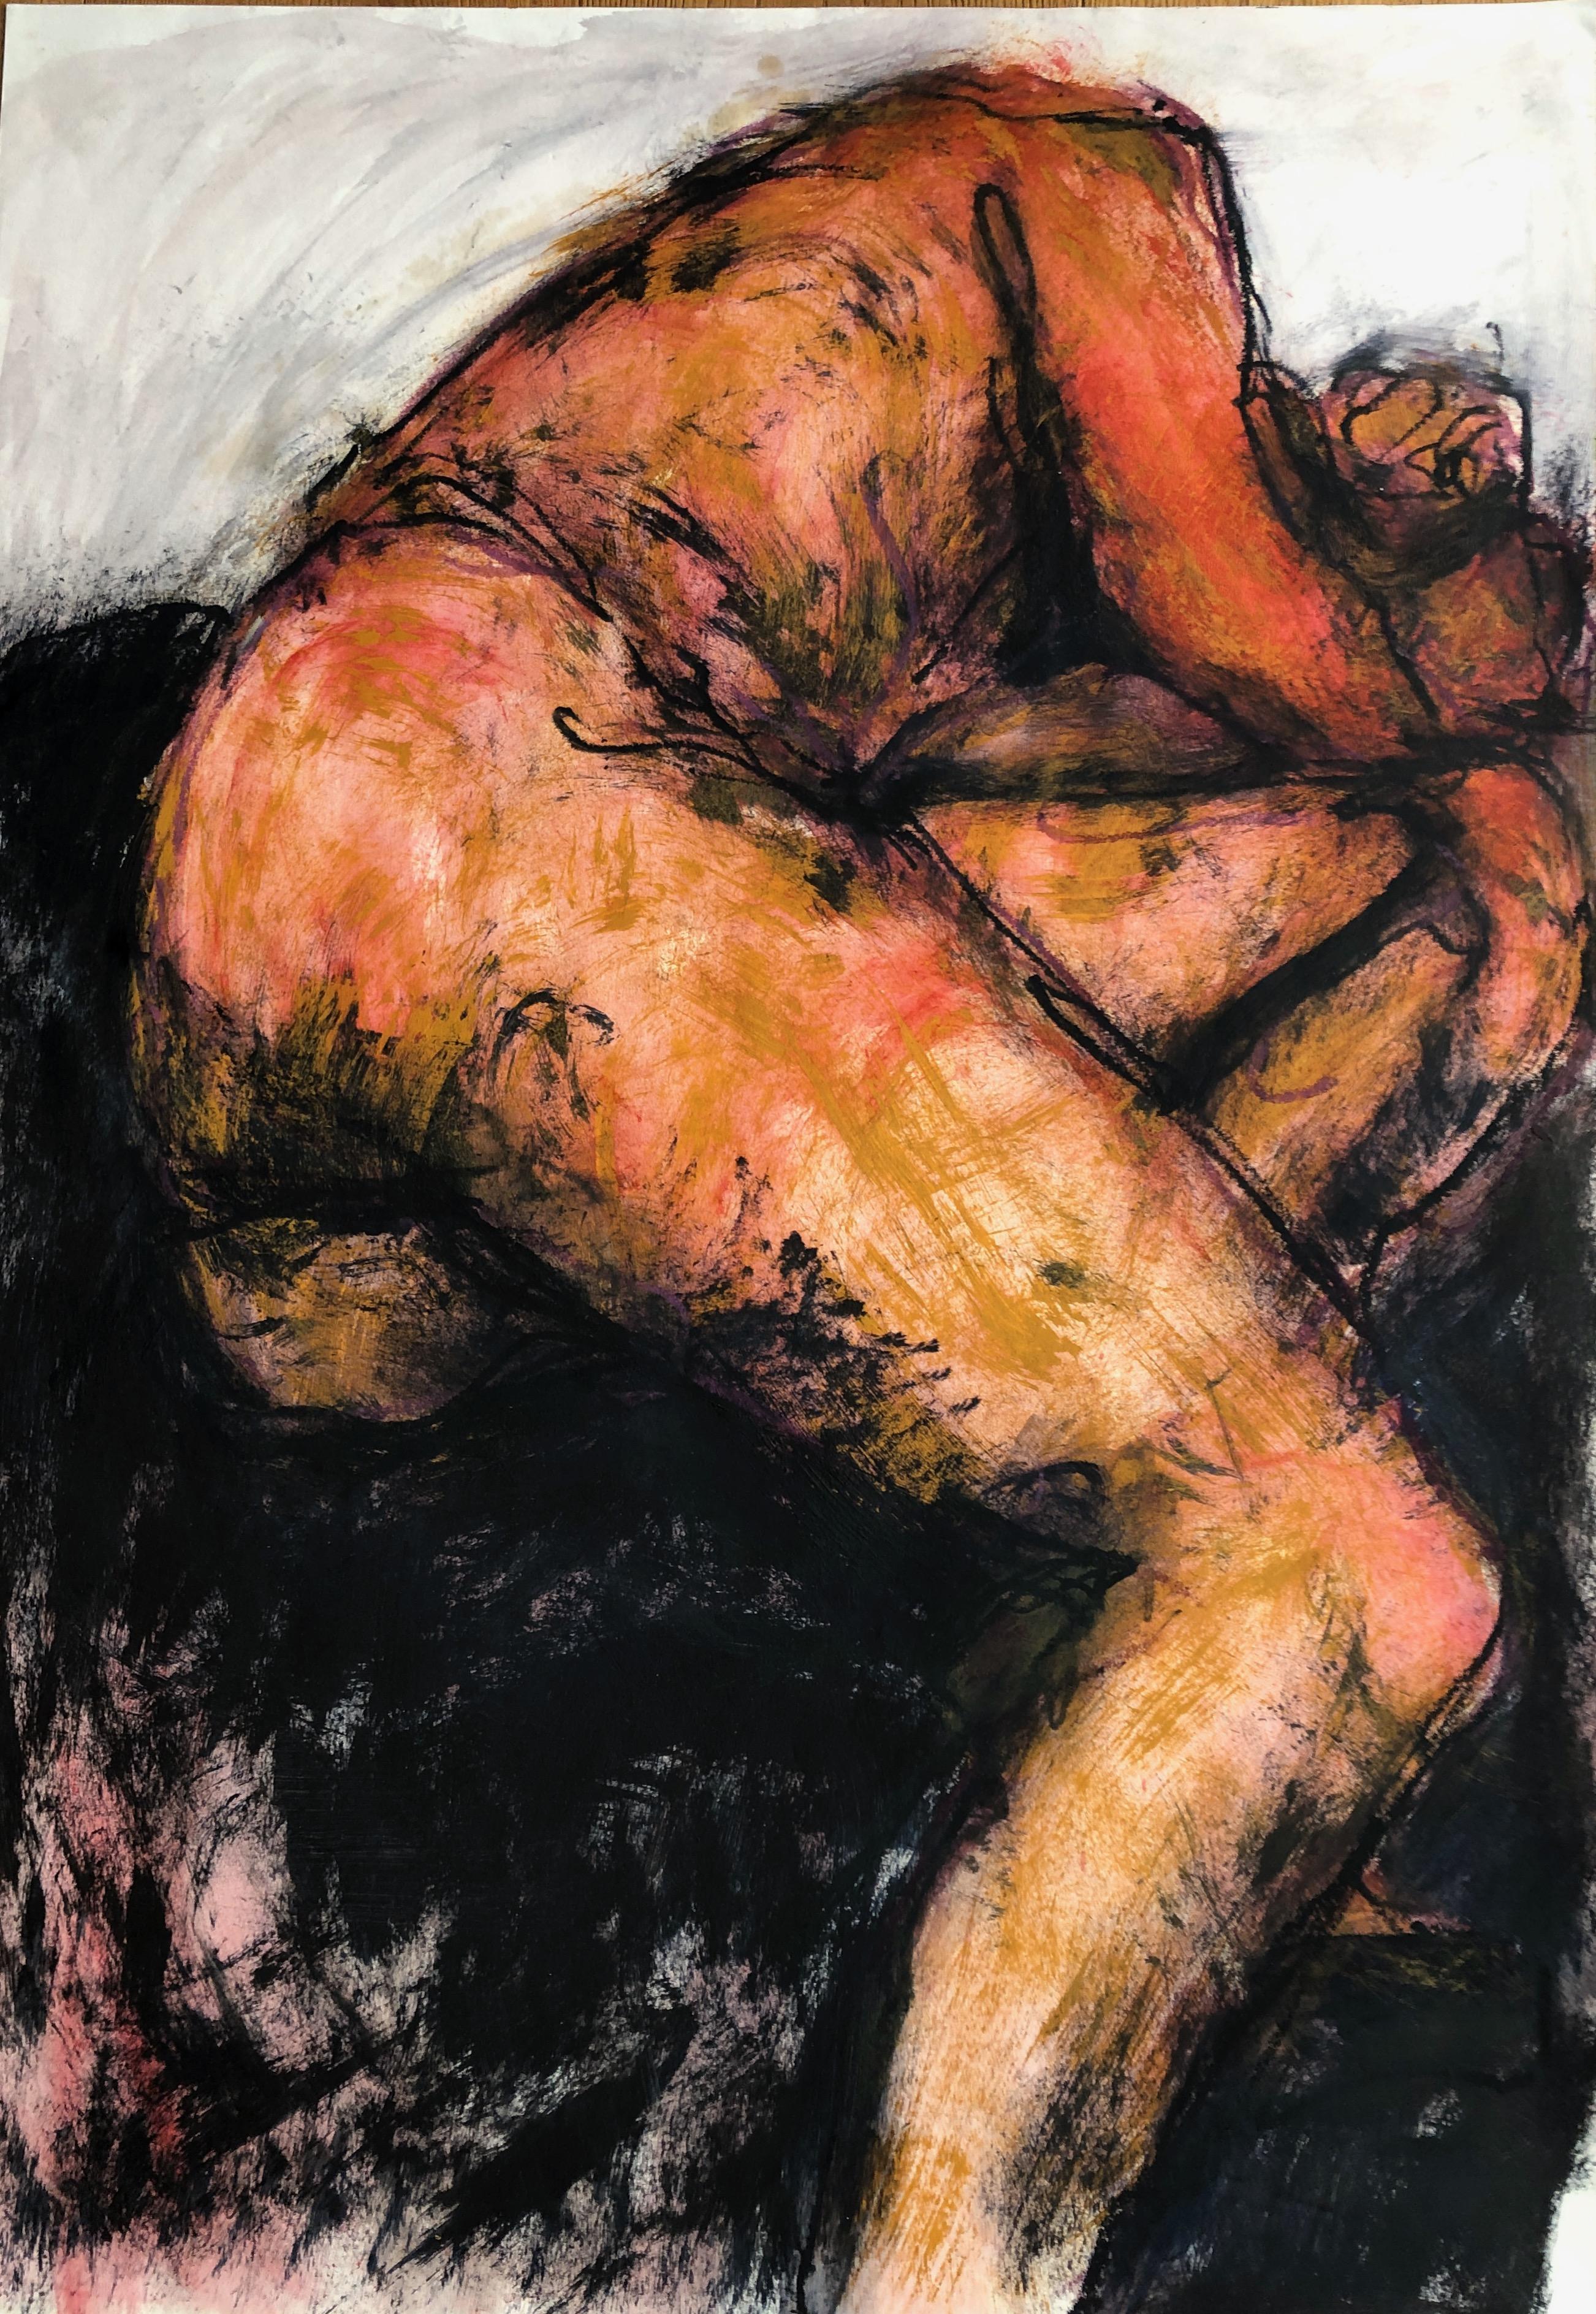 Angela Lyle Nude Painting - Sleeping Man. Contemporary Mixed Media on paper